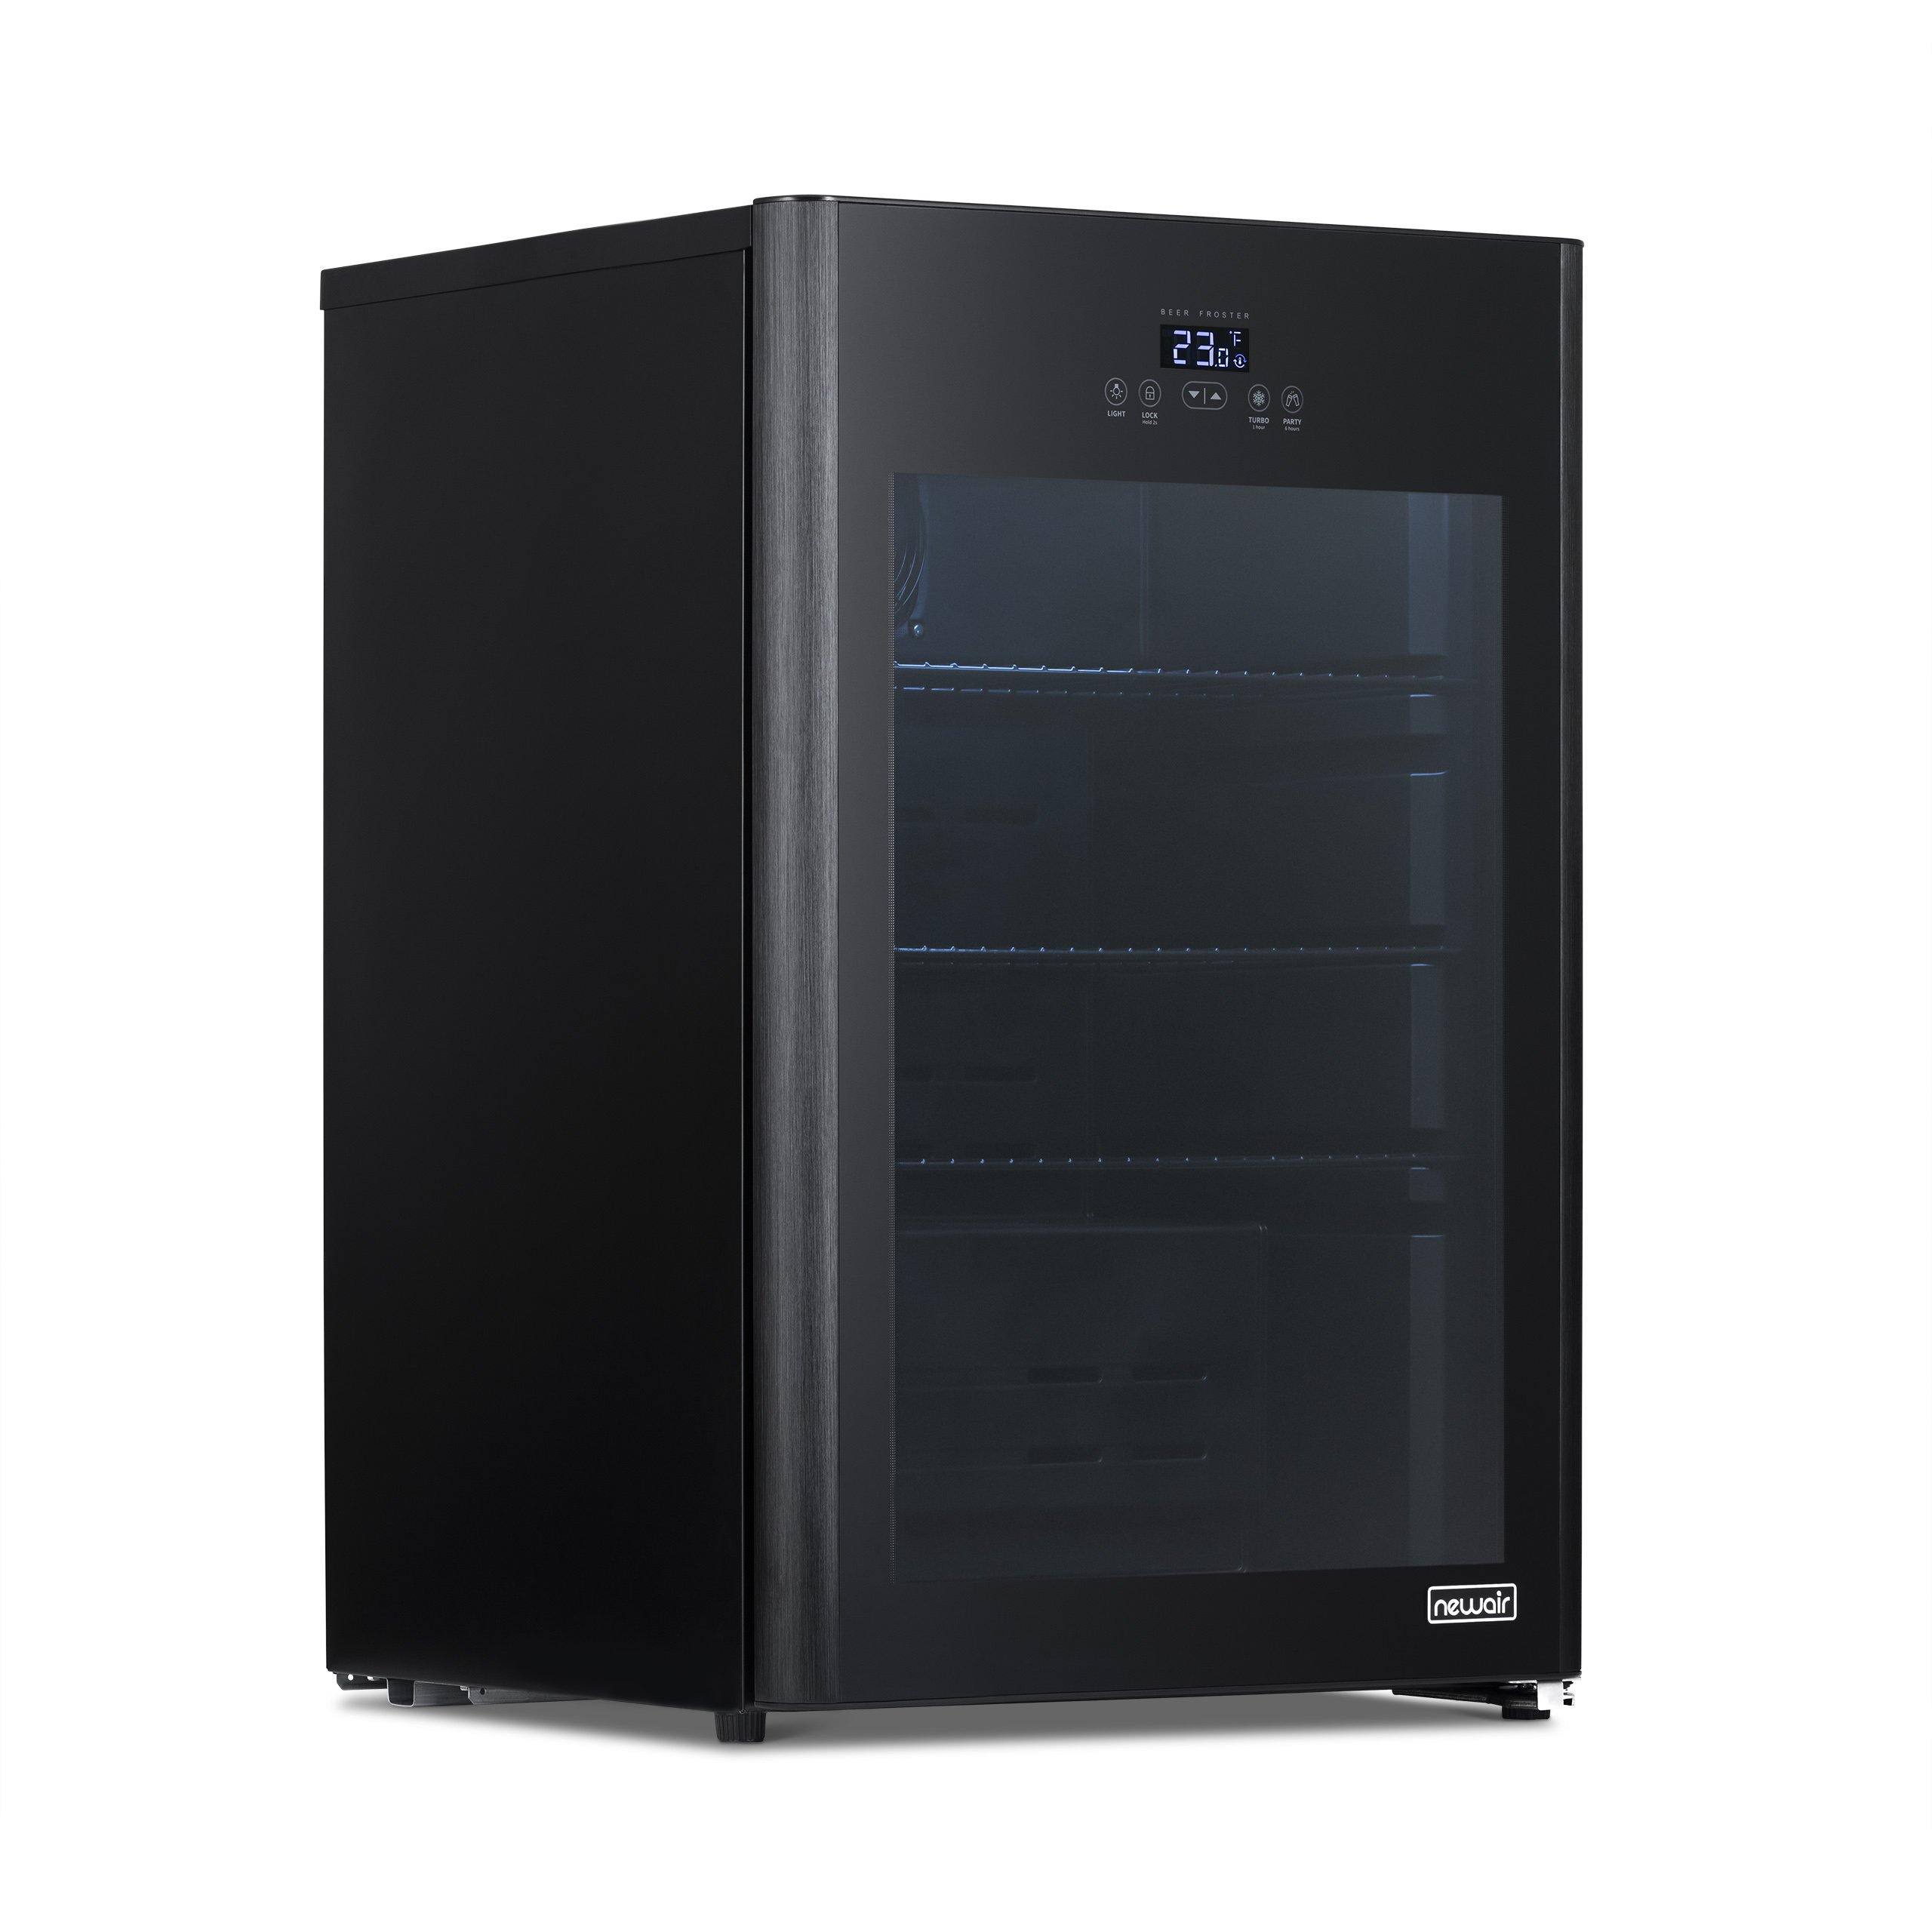 Newair Froster 125-Can Freestanding Black Beverage Center (NBF125BK00) - Chills Down to 23 Degrees!